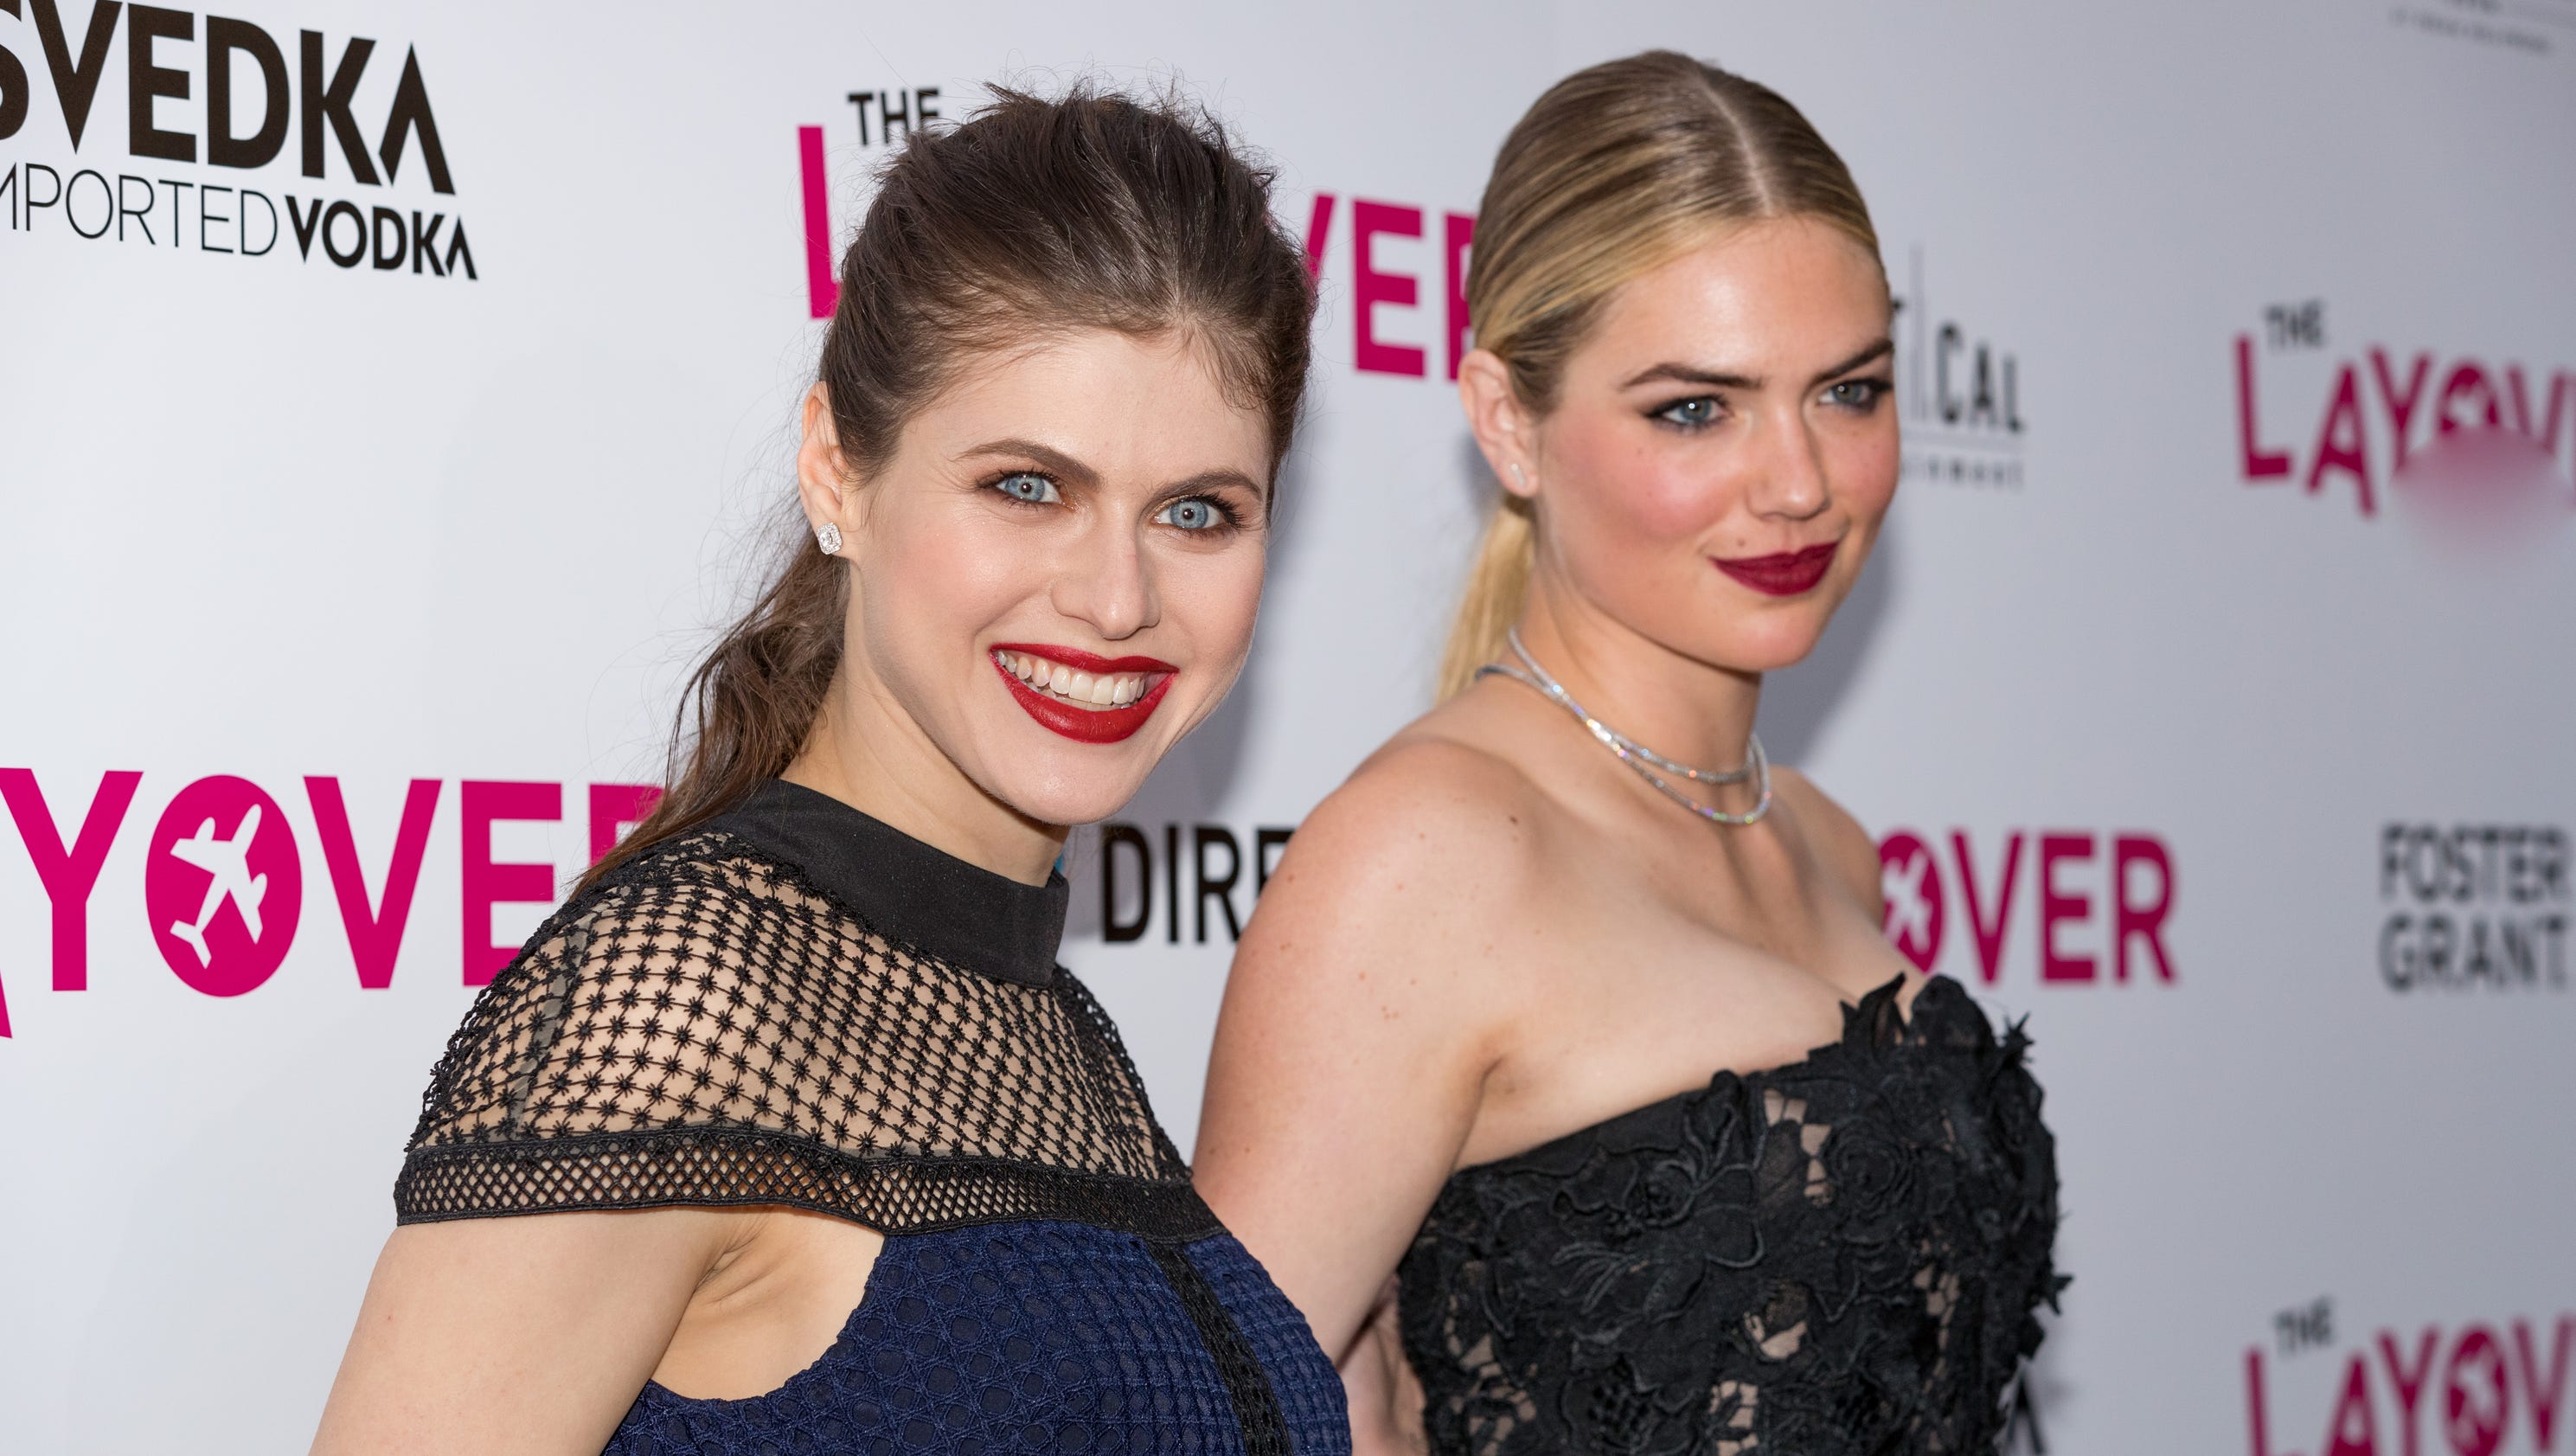 Kate Upton Alexandra Daddarios Looks Complement At Layover Premiere